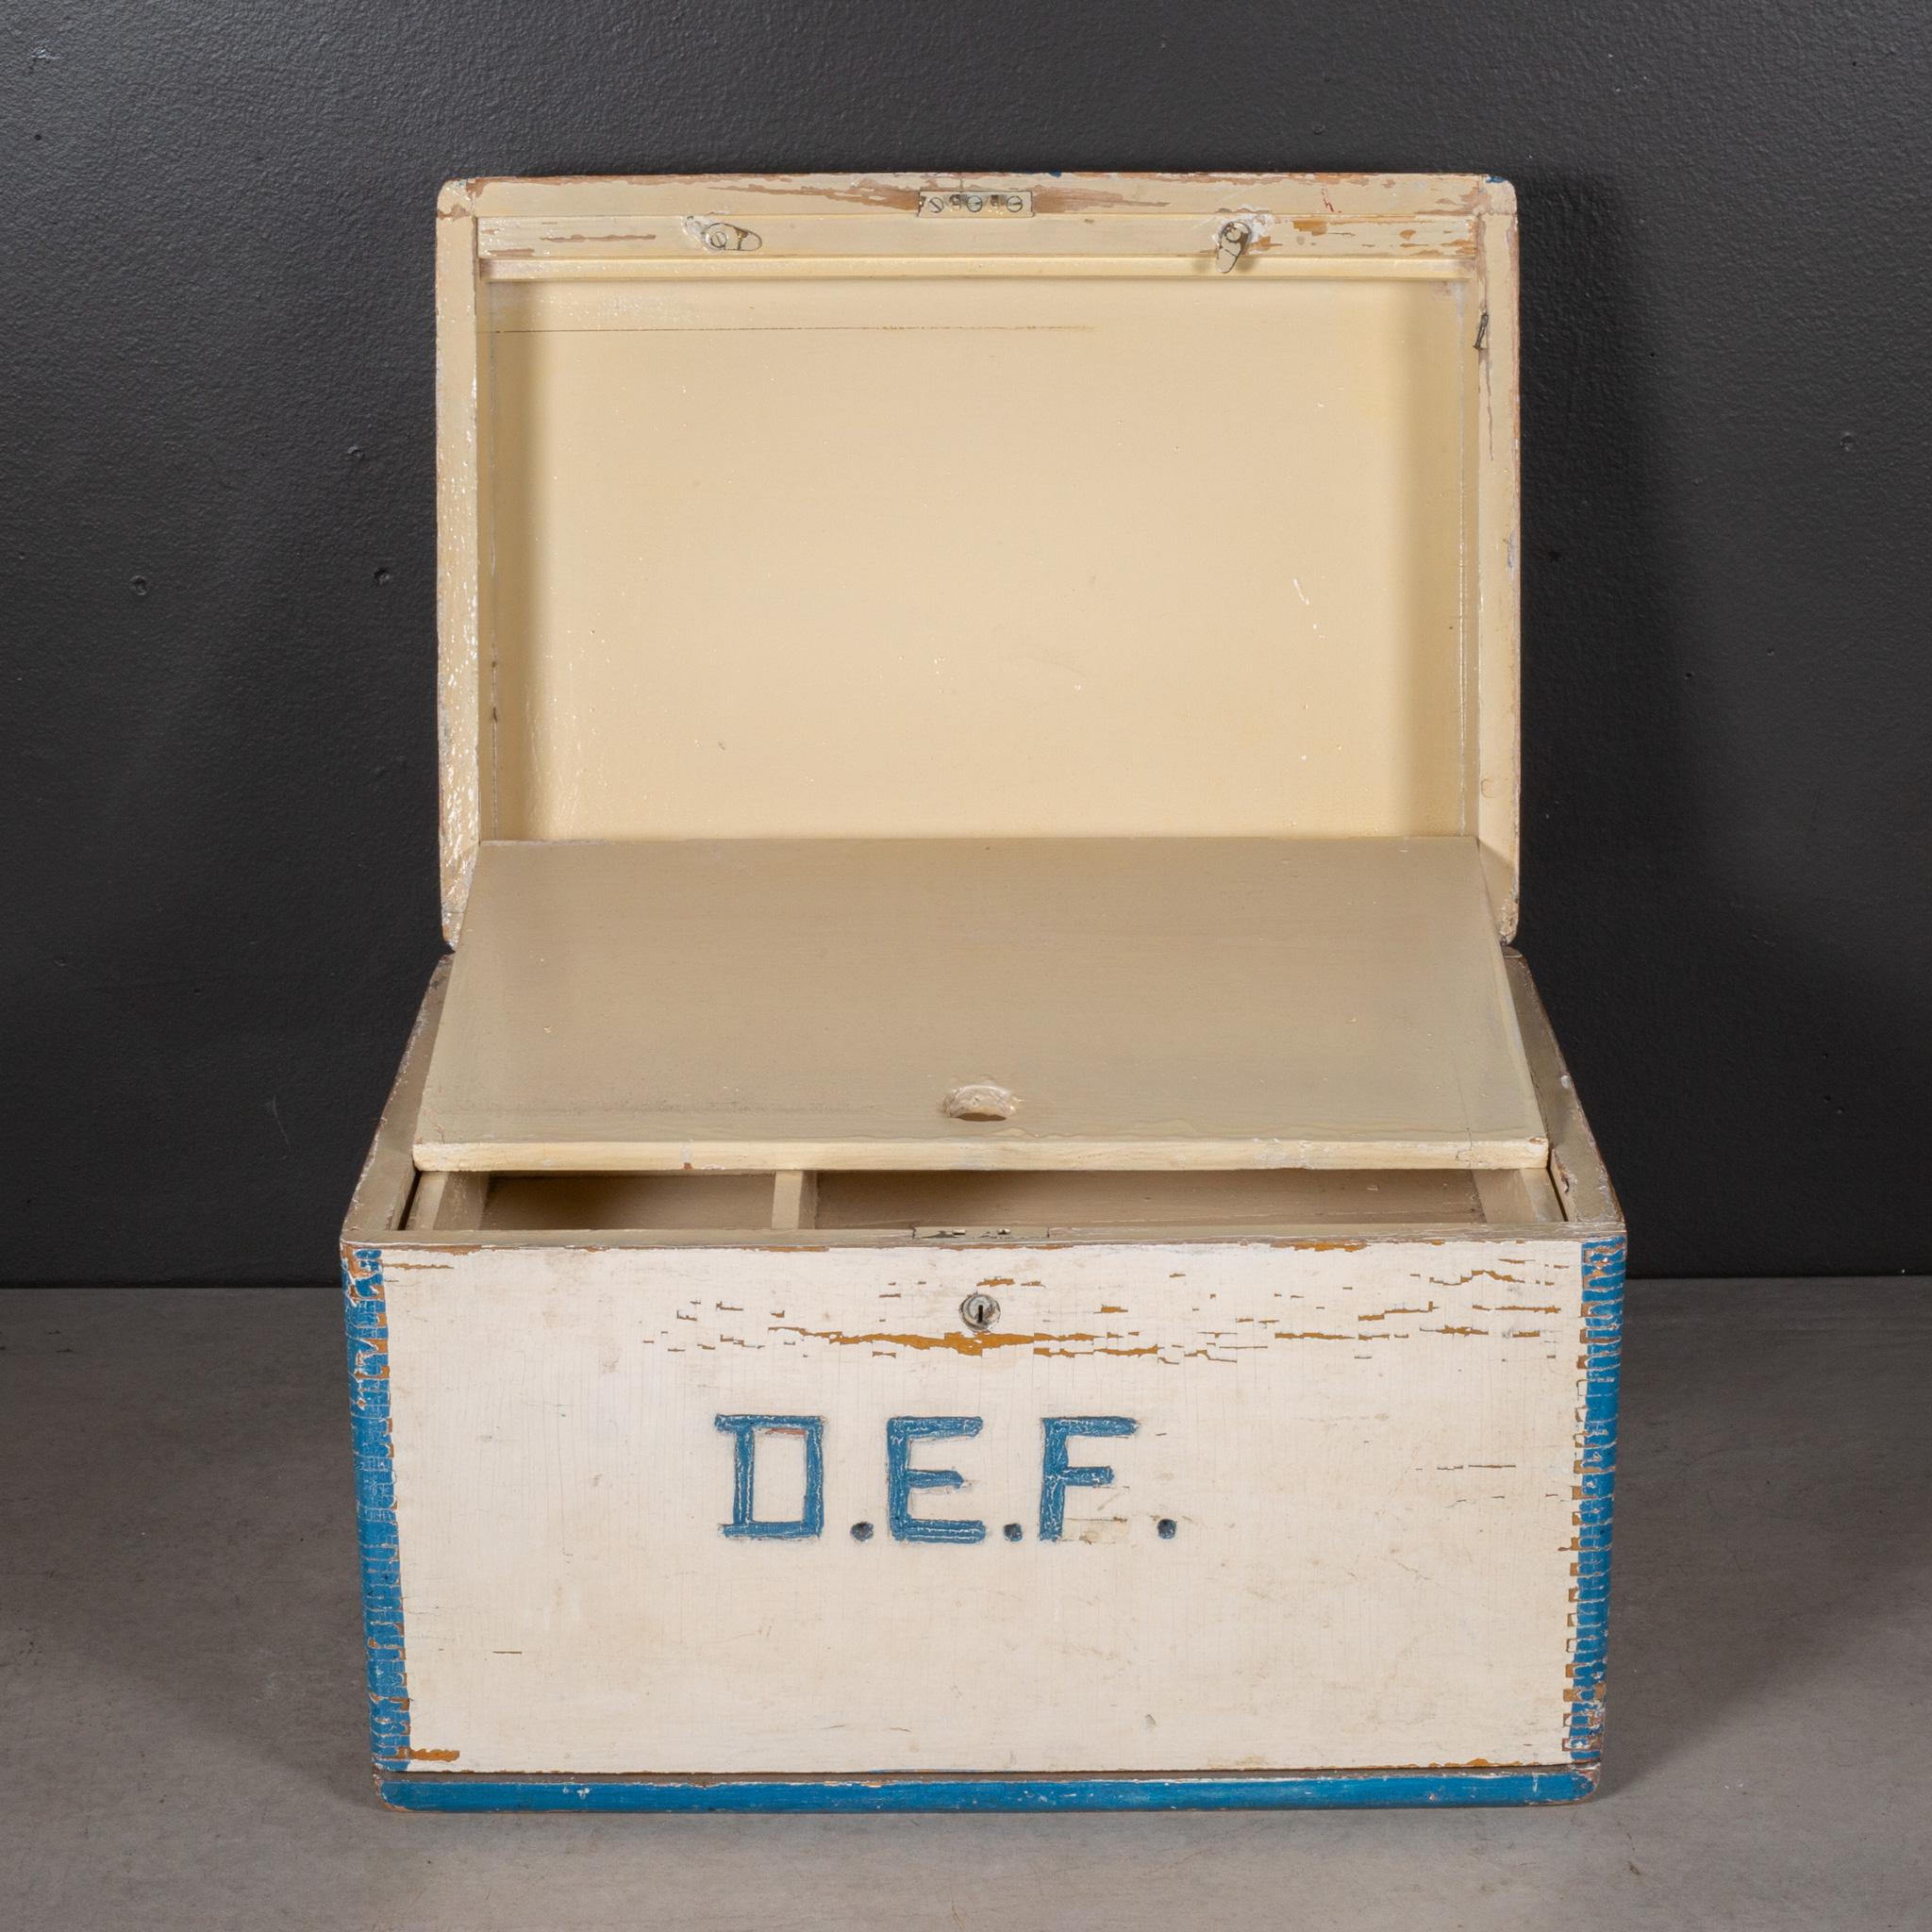 ABOUT

A handmade wooden toolbox with inner removable segmented tray and drop down secret lid compartment. Monogrammed D.E.F. Solidly constructed with dovetail joints.

    CREATOR Unknown.
    DATE OF MANUFACTURE c.1940.
    MATERIALS AND